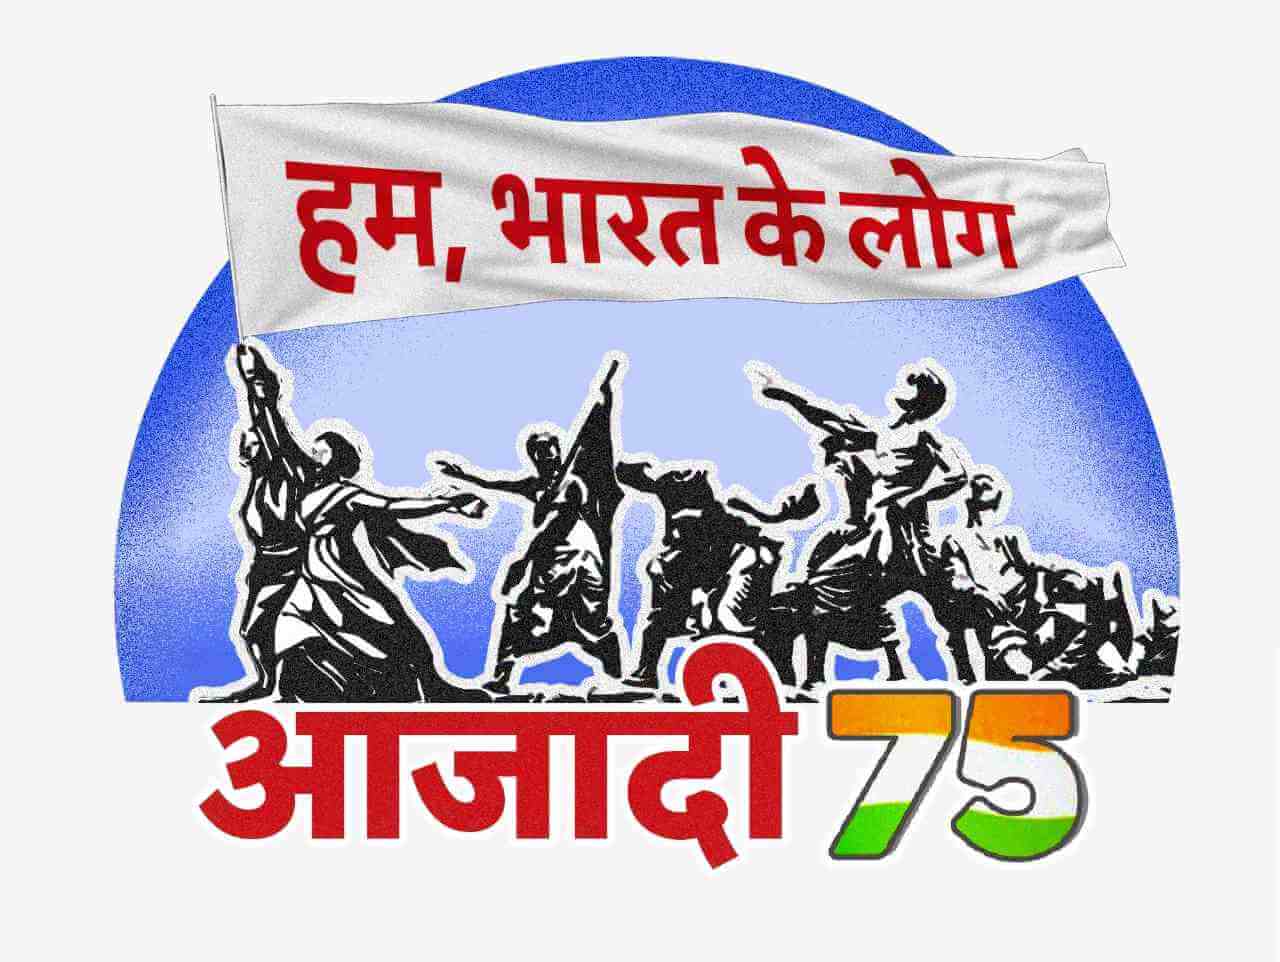 Campaign '75 Years of Independence'